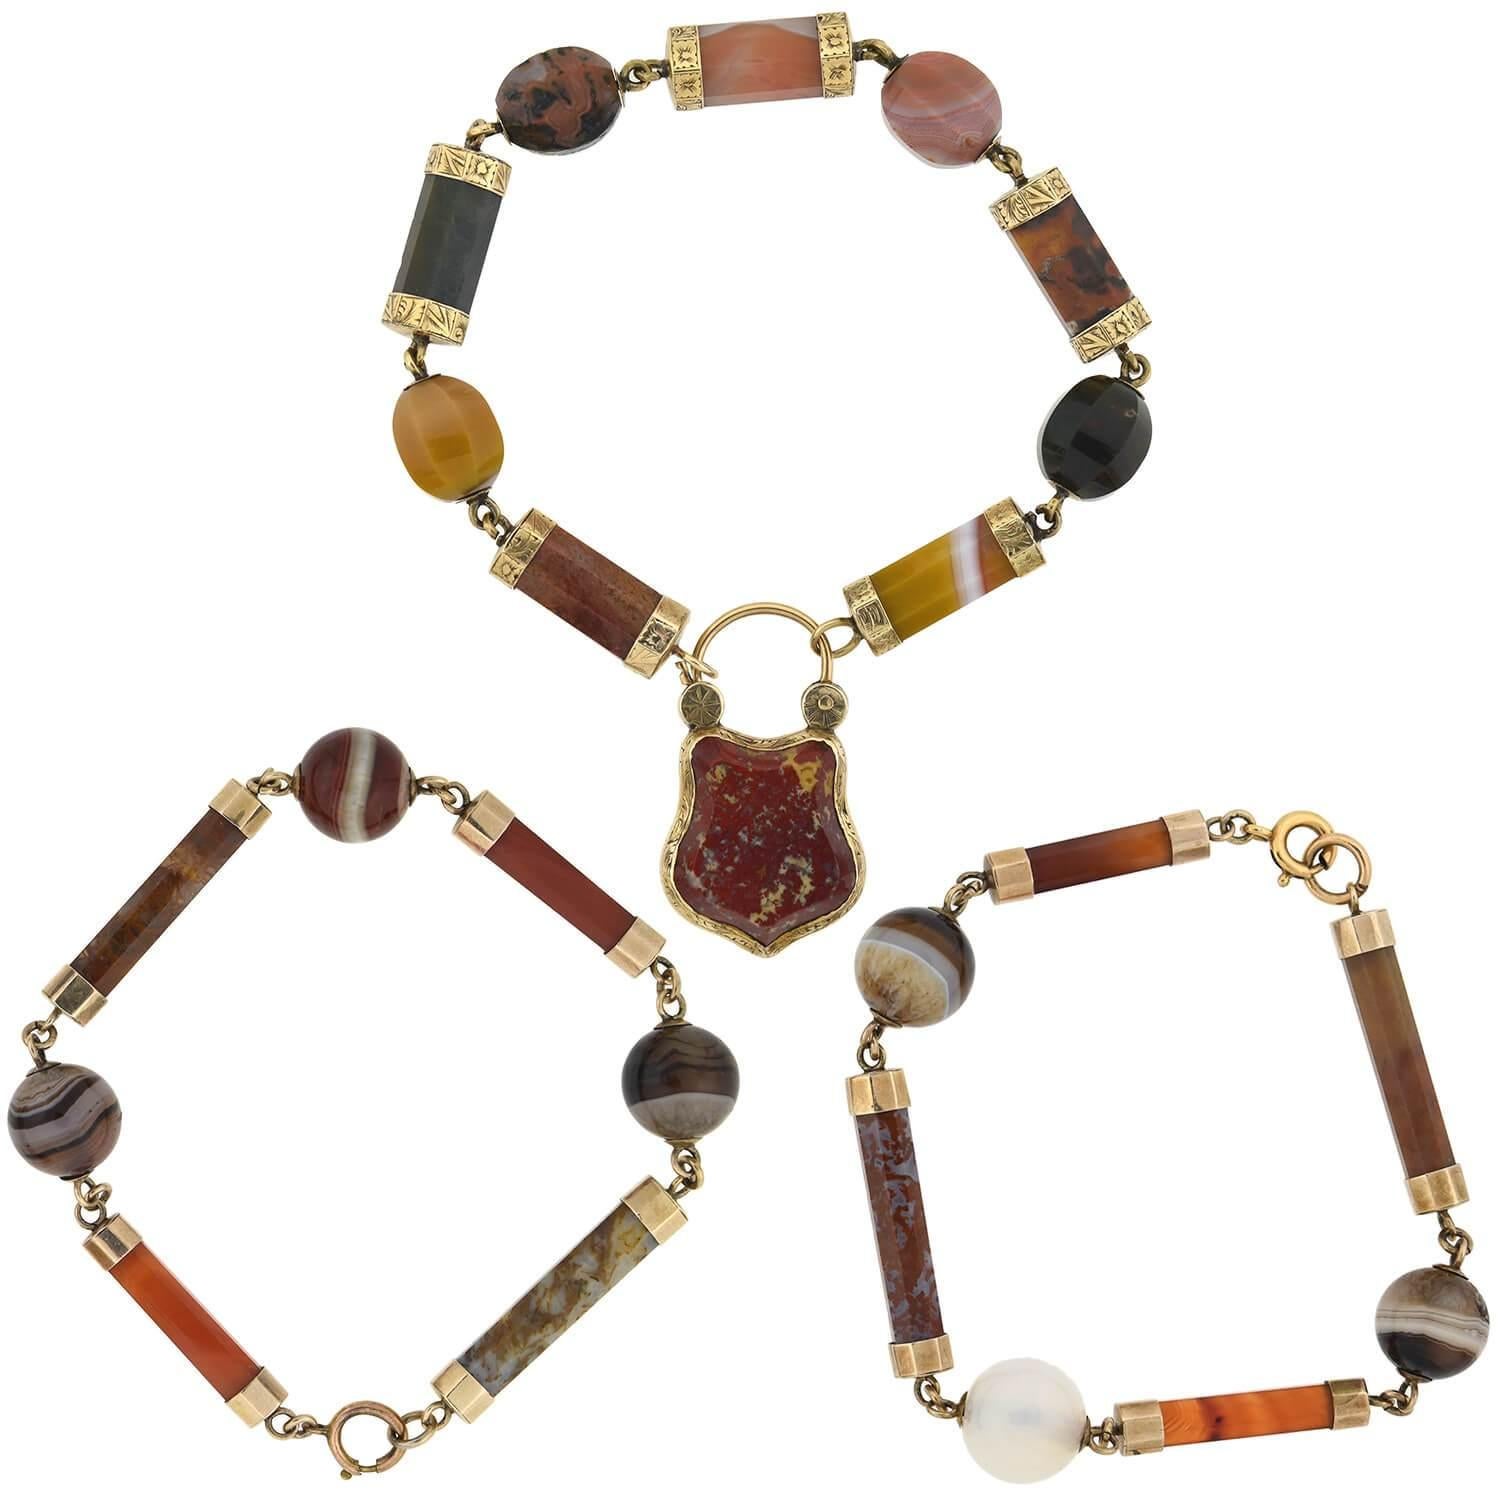 A very unique compilation piece from the Victorian (1880s) era! Displaying a variety of muted rainbow shades against beautiful 9kt yellow gold, this fabulous piece can be worn as either a necklace or a complementary trio of bracelets! Multicolored